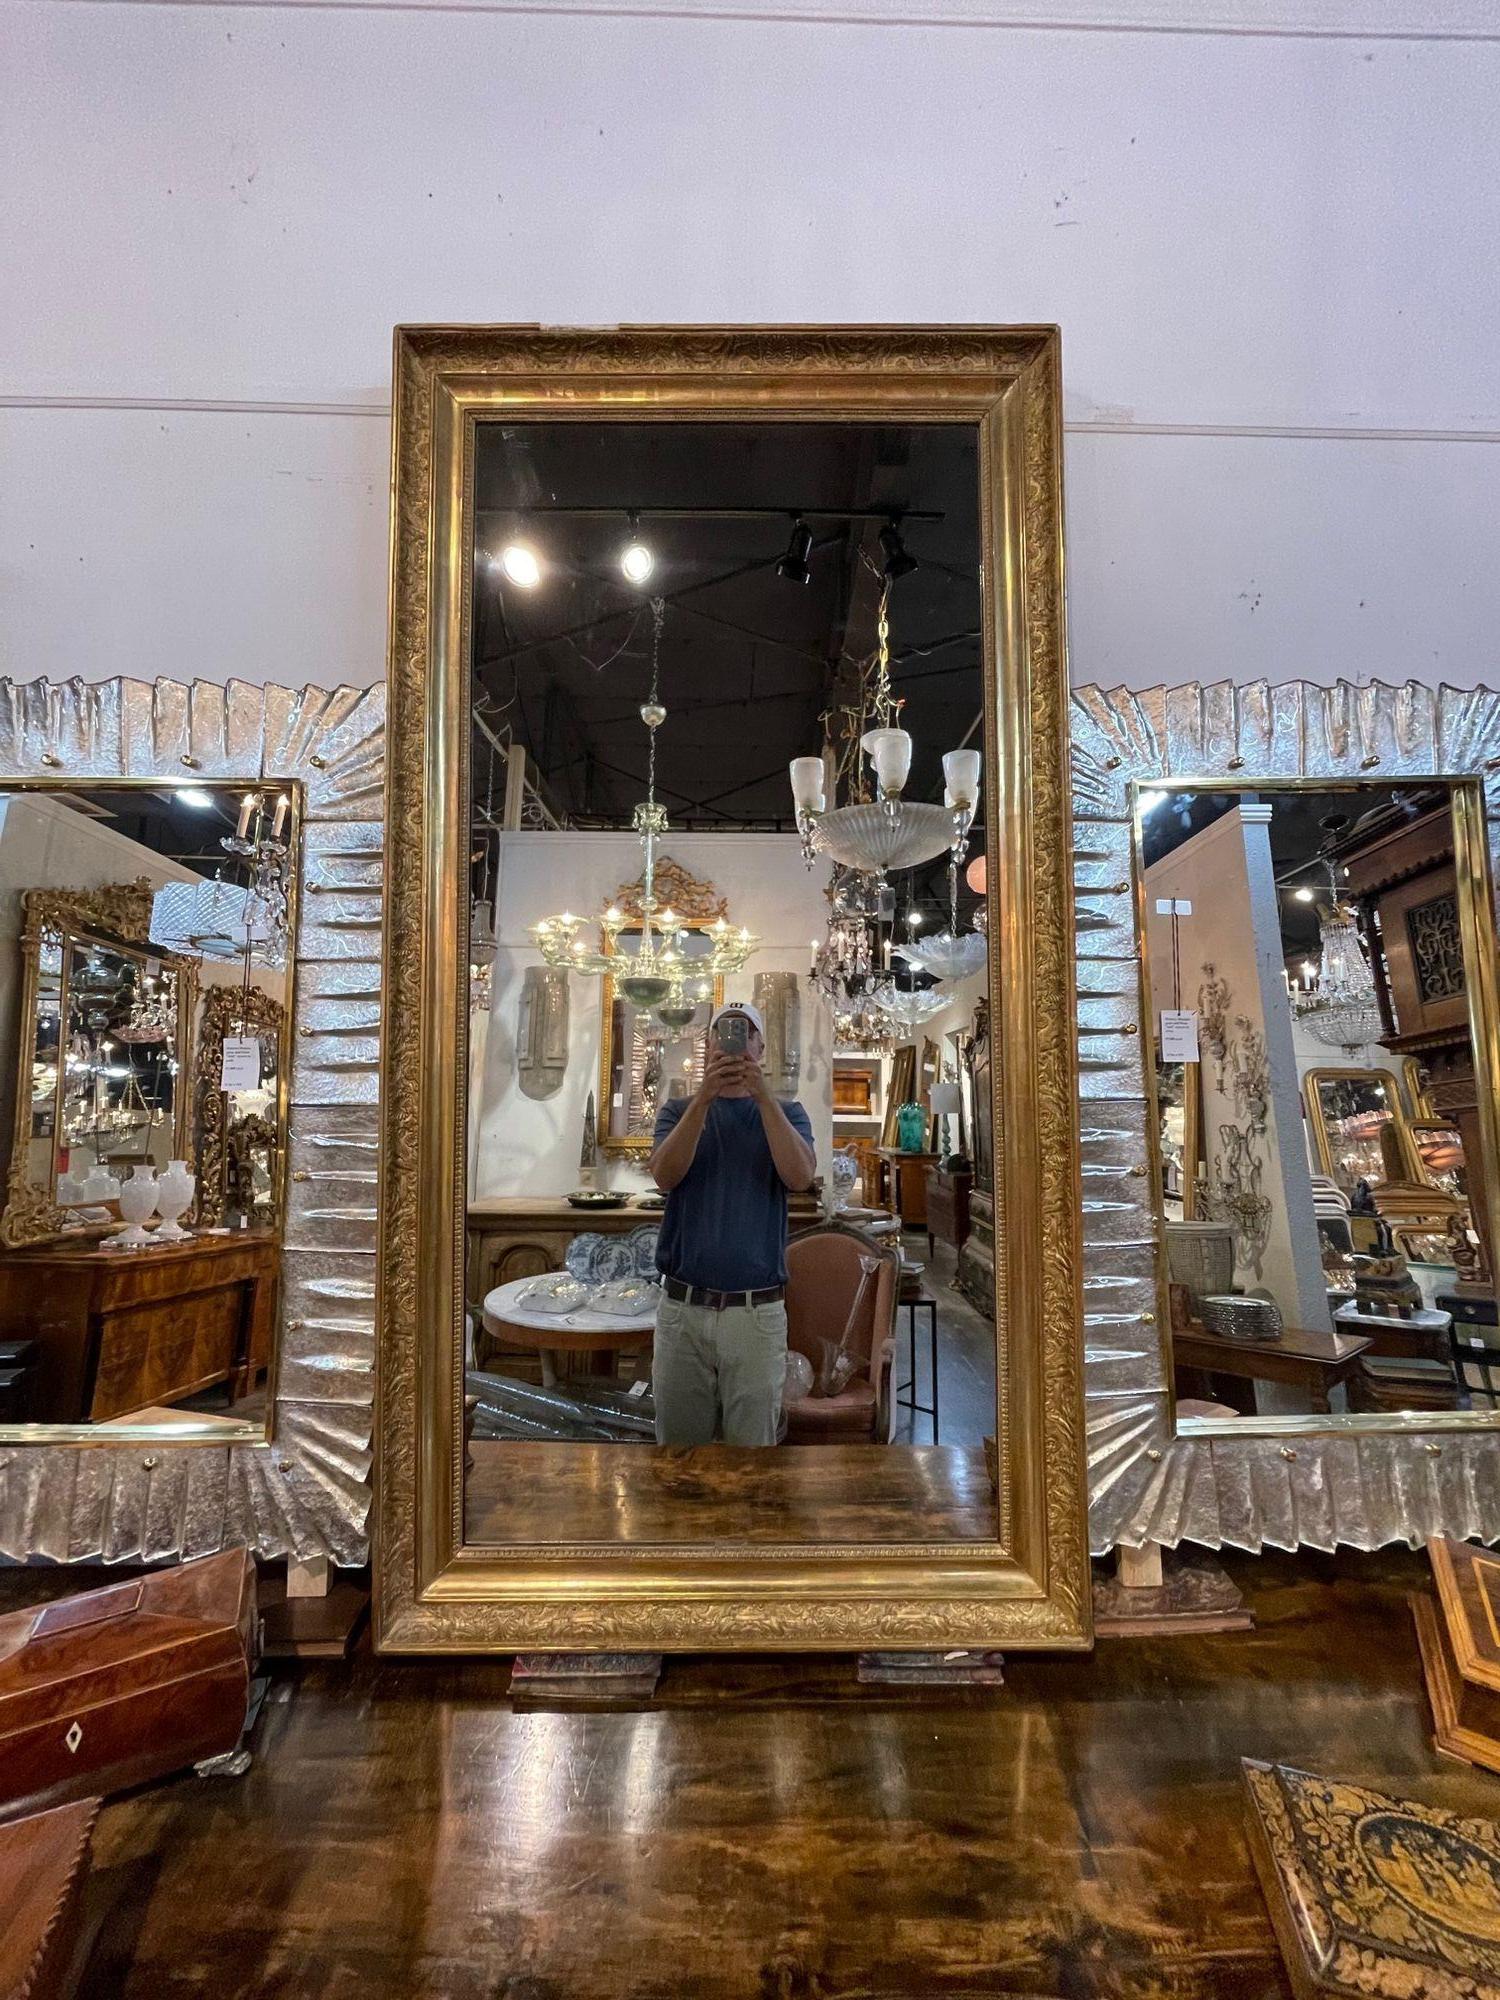 Very fine 19th century Napoleon III giltwood mirror. Featuring a lovely decorative pattern and a beaded inner border. A beautiful mirror that makes a real statement!
Note: A minor restoration needs to be done at the top of the mirror.